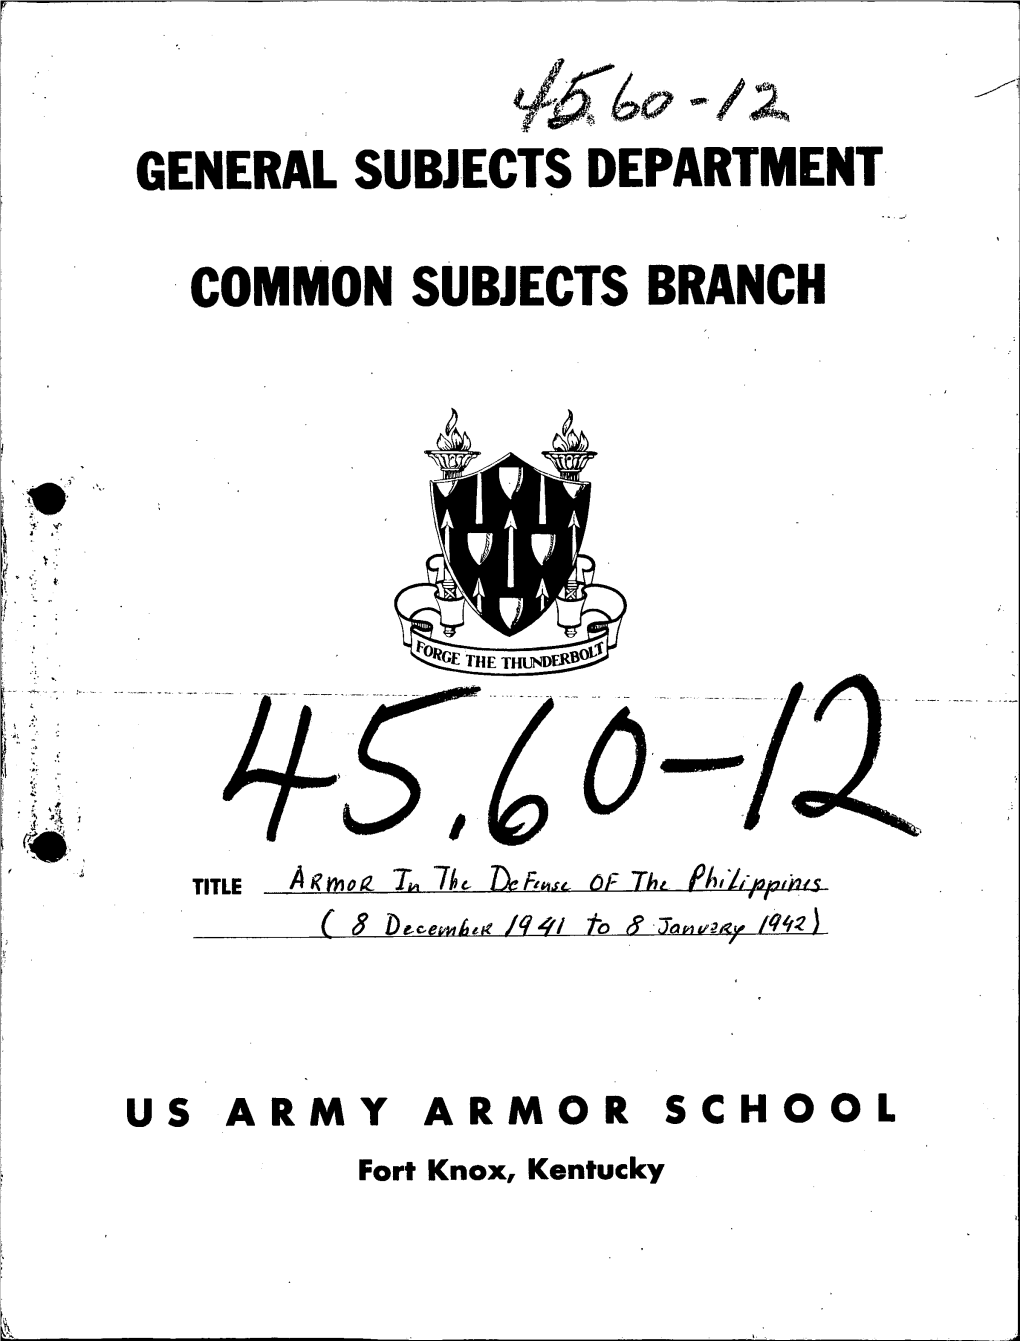 Common Subjects Branch